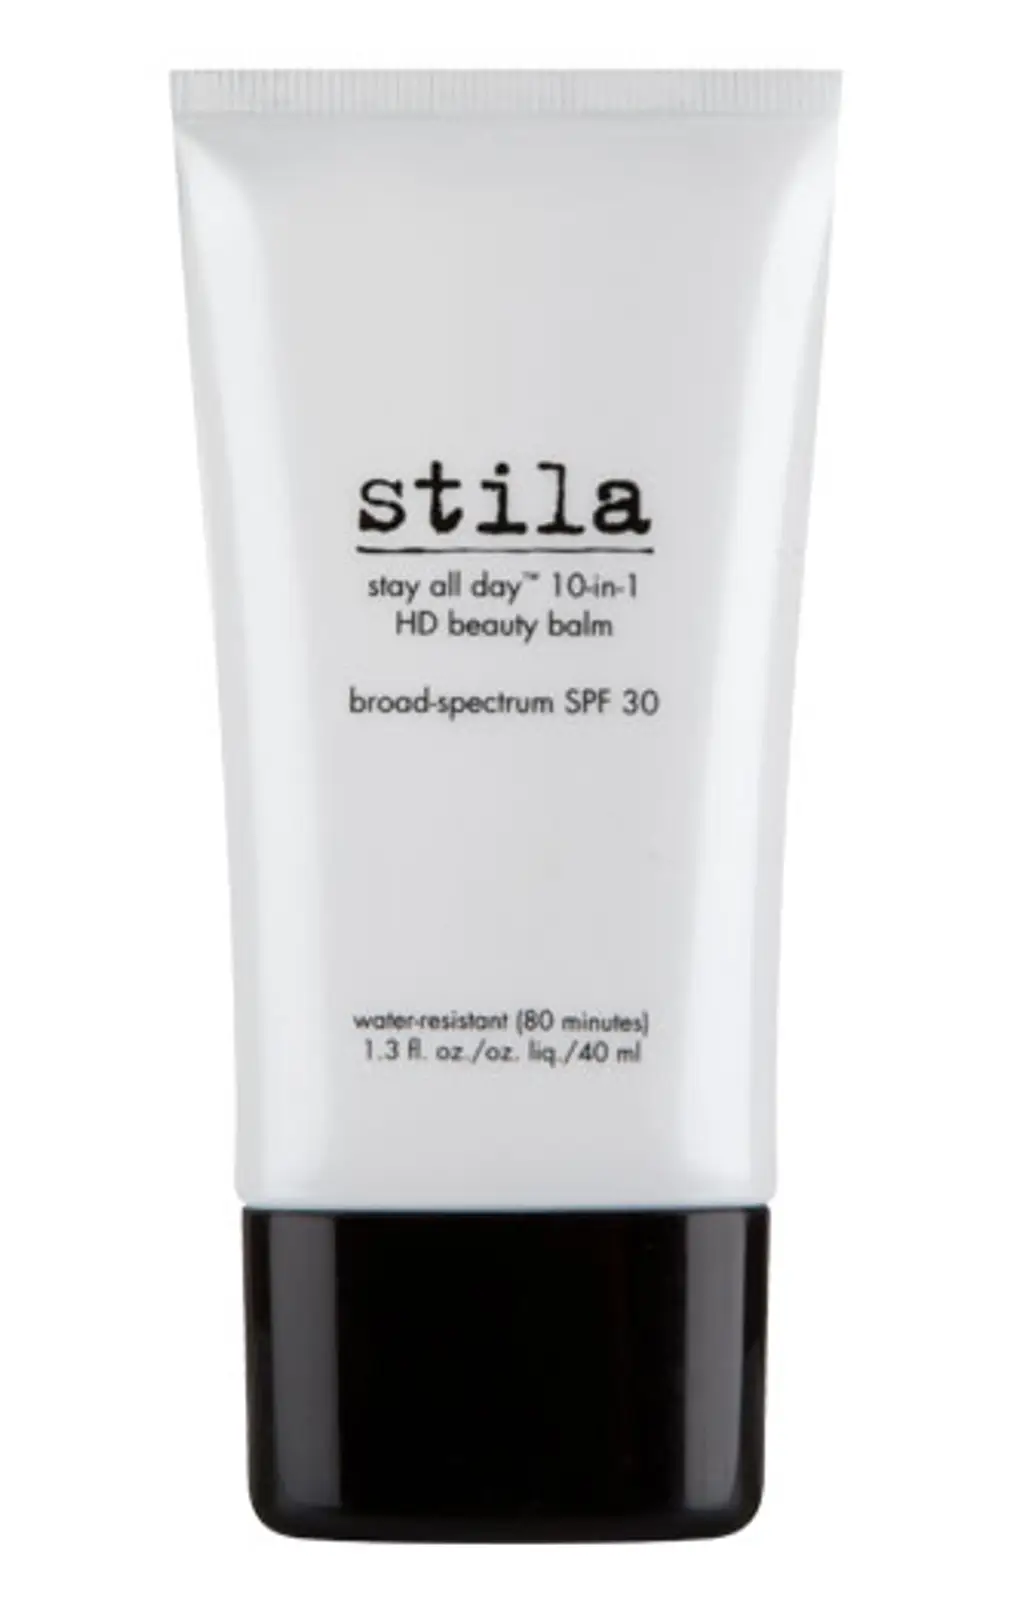 Stila All Day 10-in-1 HD Beauty Balm with SPF 30